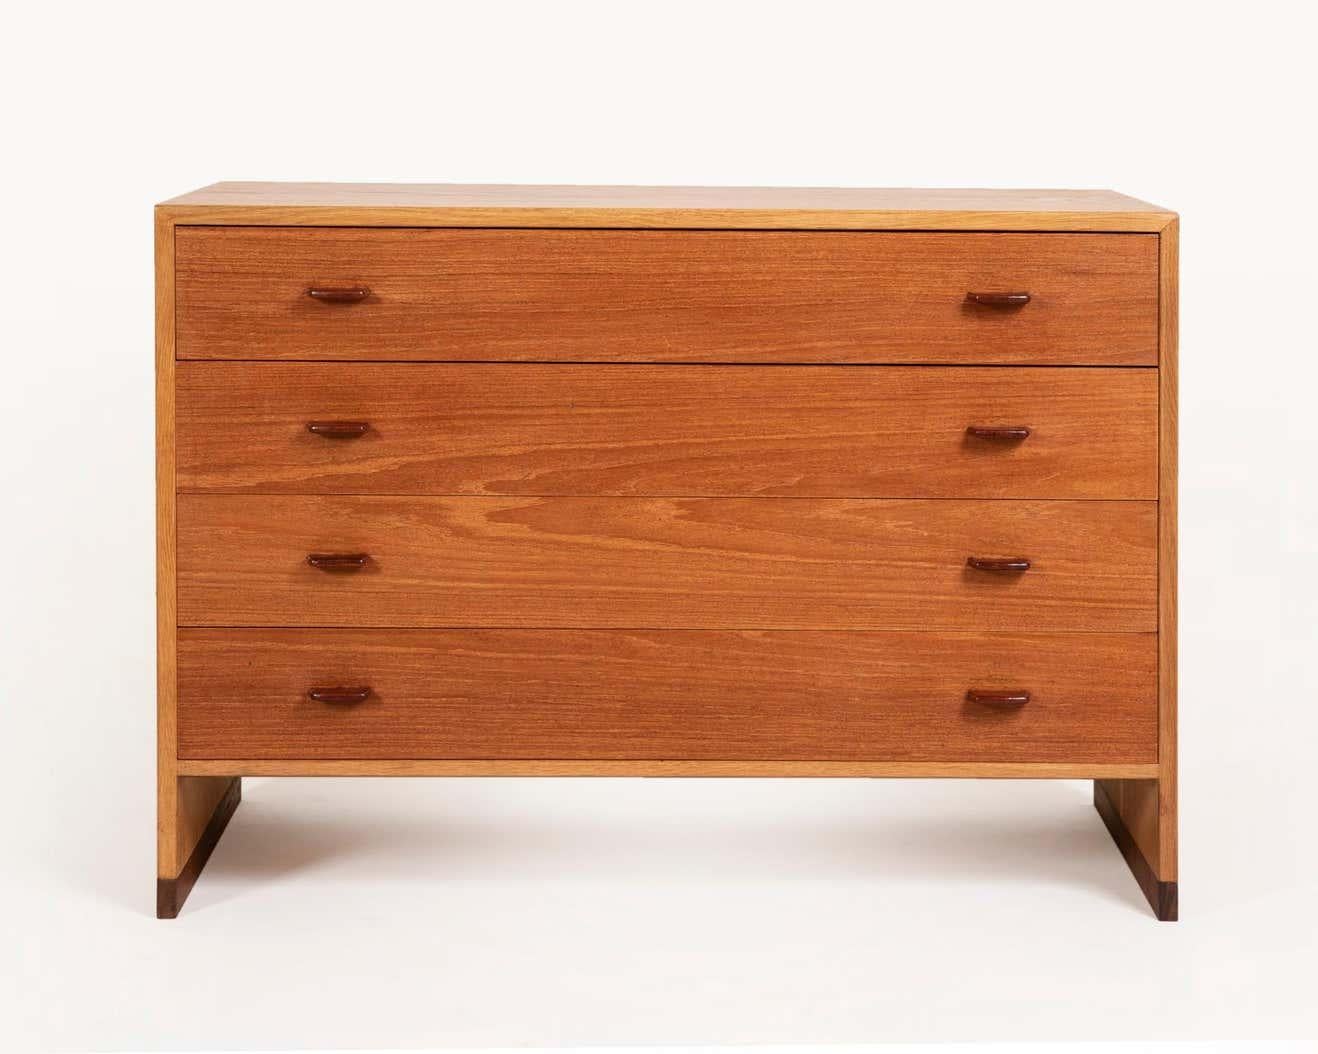 Vintage 4-drawer chest of drawers in light oak and teak with handles designed in the shape of drops.
This model RY17 dresser has 4 drawers and is equipped with the iconic handles designed by Hans Wegner, carved from solid oak.
The drawers are